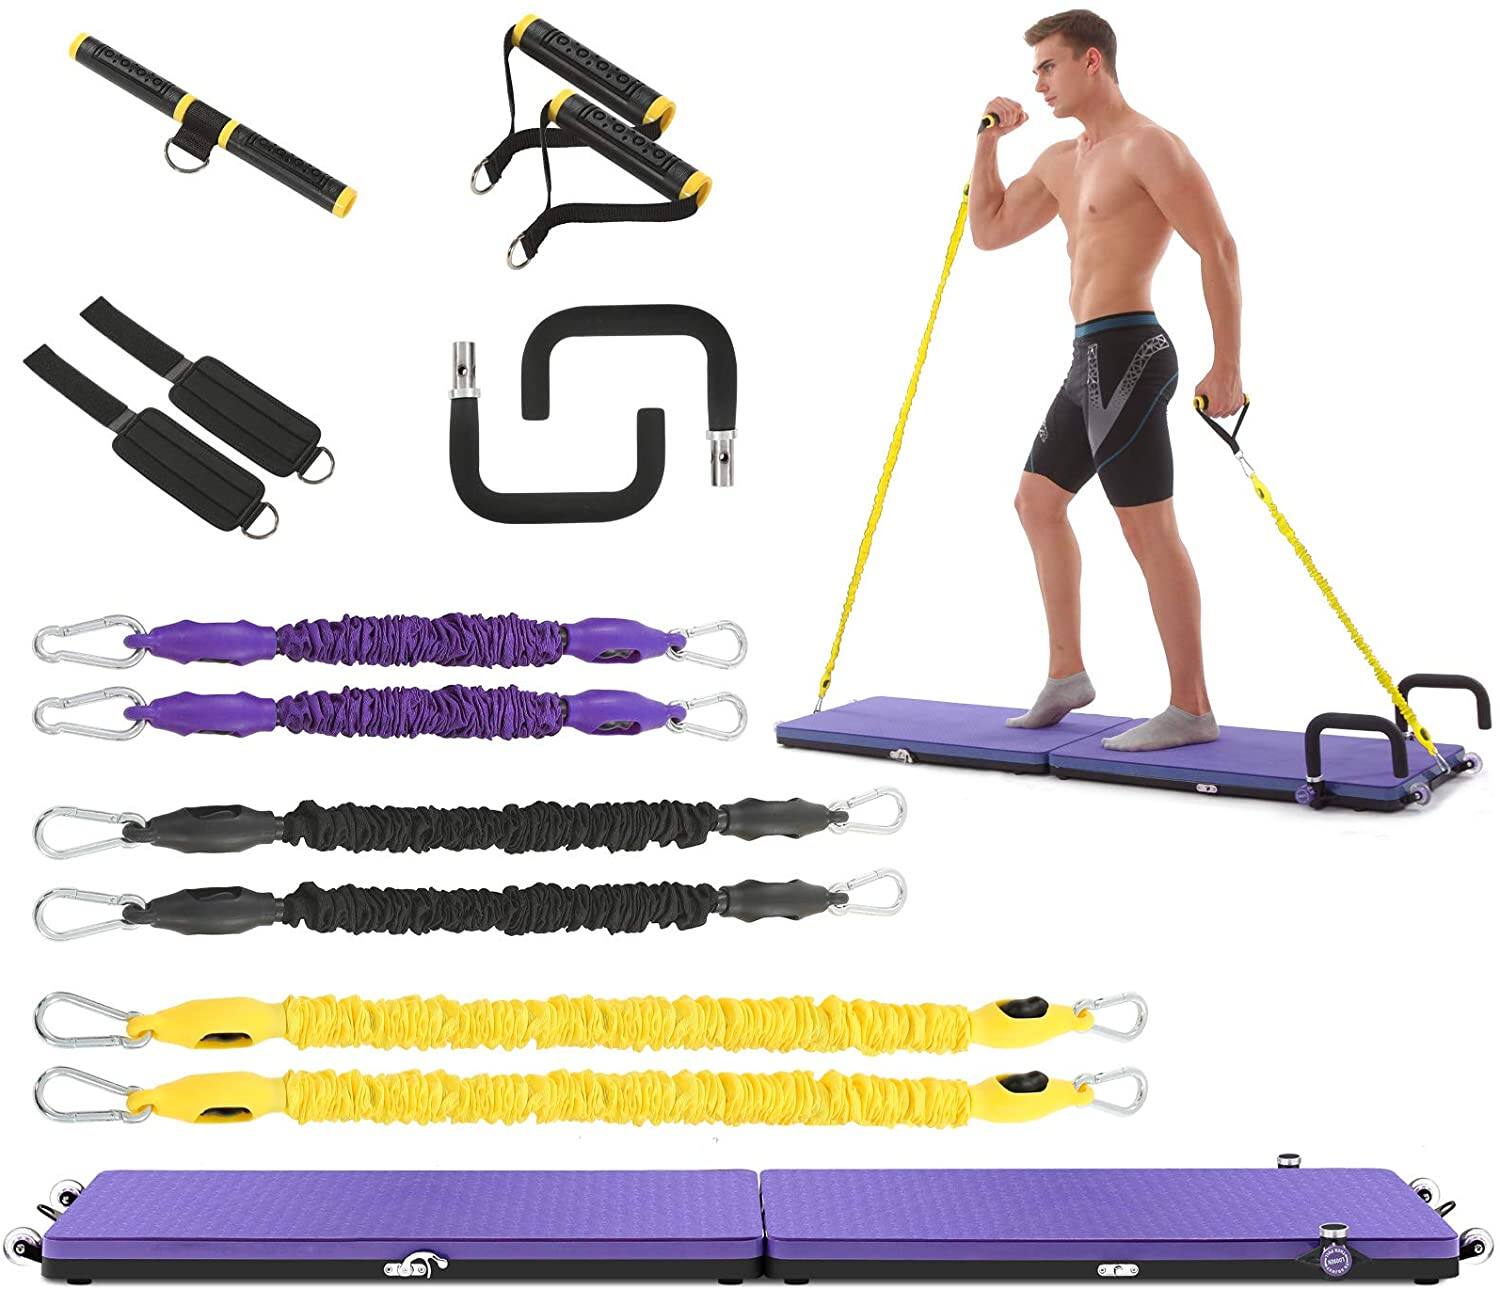 14-Pc iDeer Life All in One Home Gym Package $69.99 + Free shipping